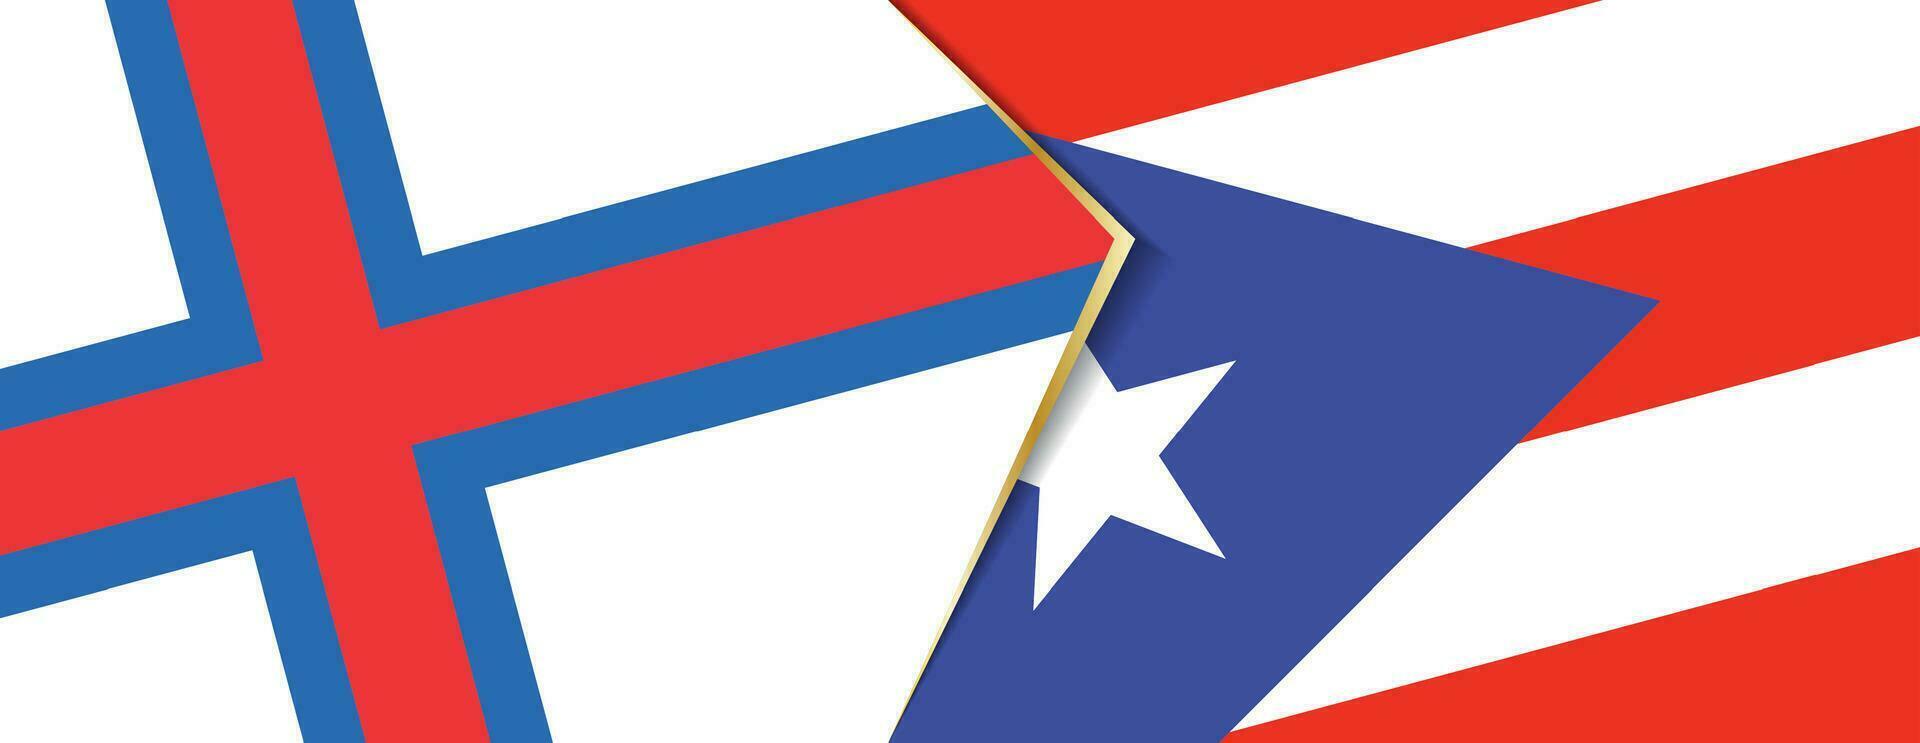 Faroe Islands and Puerto Rico flags, two vector flags.